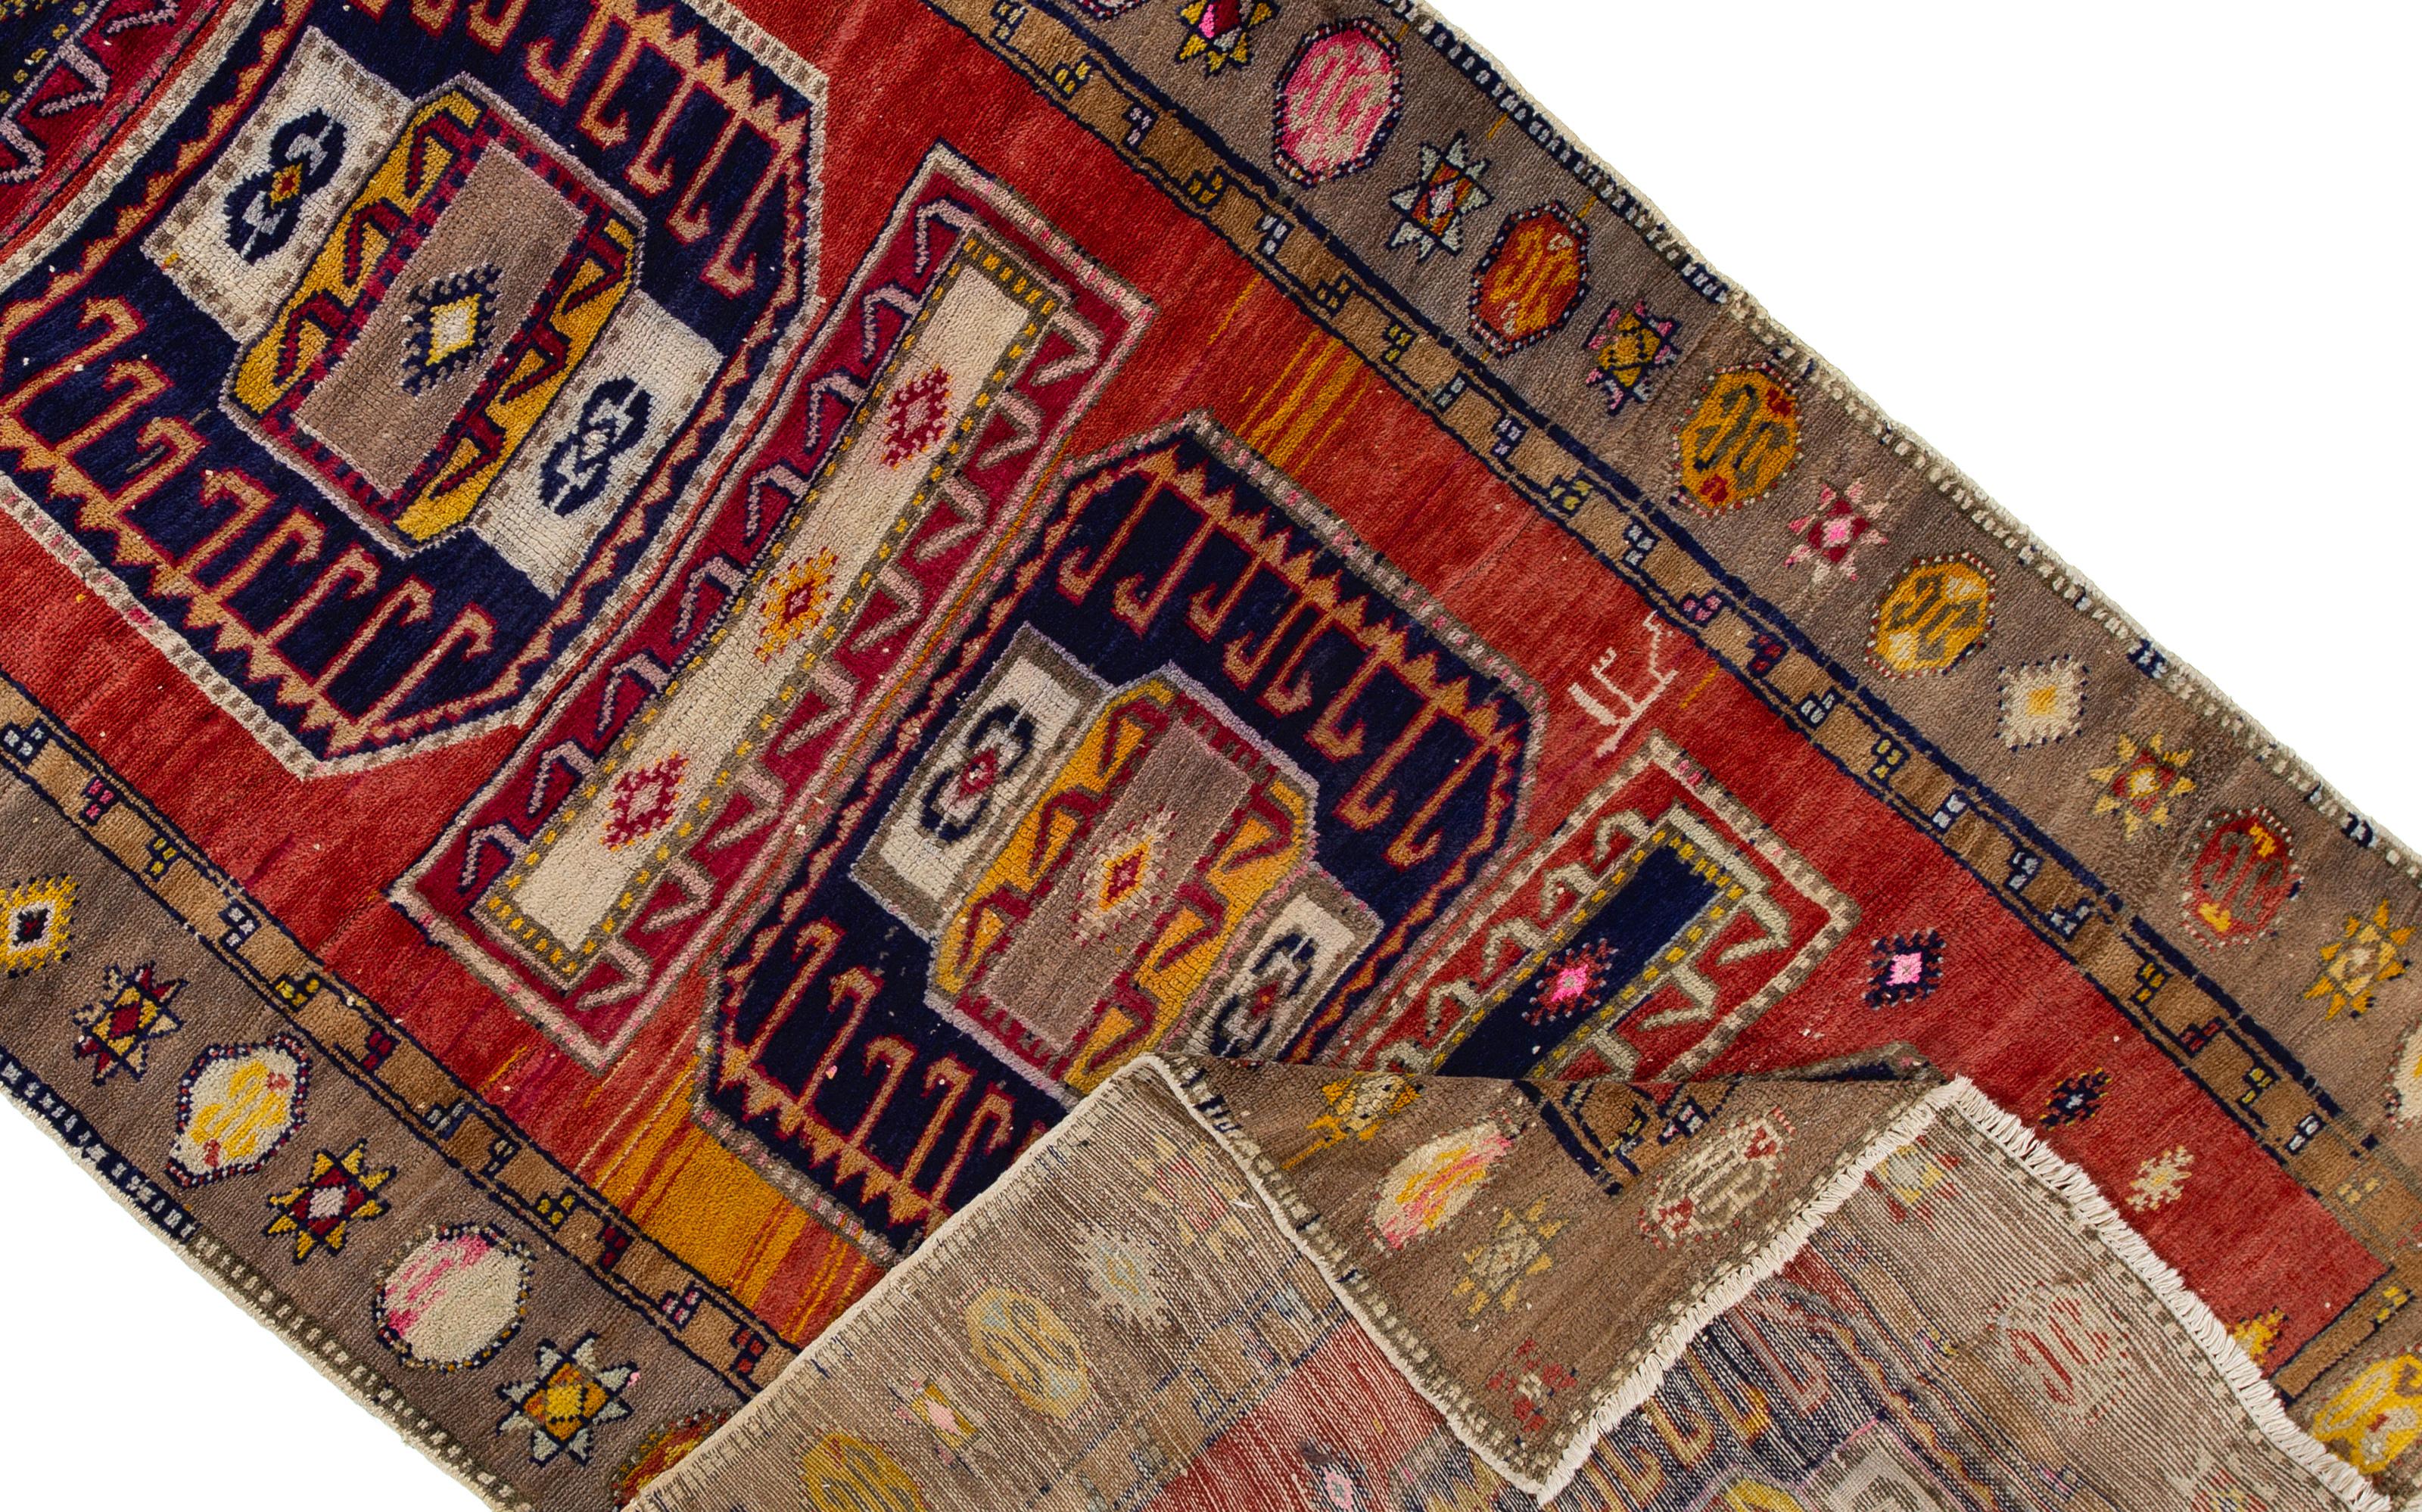 Beautiful Vintage Northwest Persian runner rug, hand-knotted wool with a red field and colorful accents with an all over geometric design.

This rug measures 5' 8